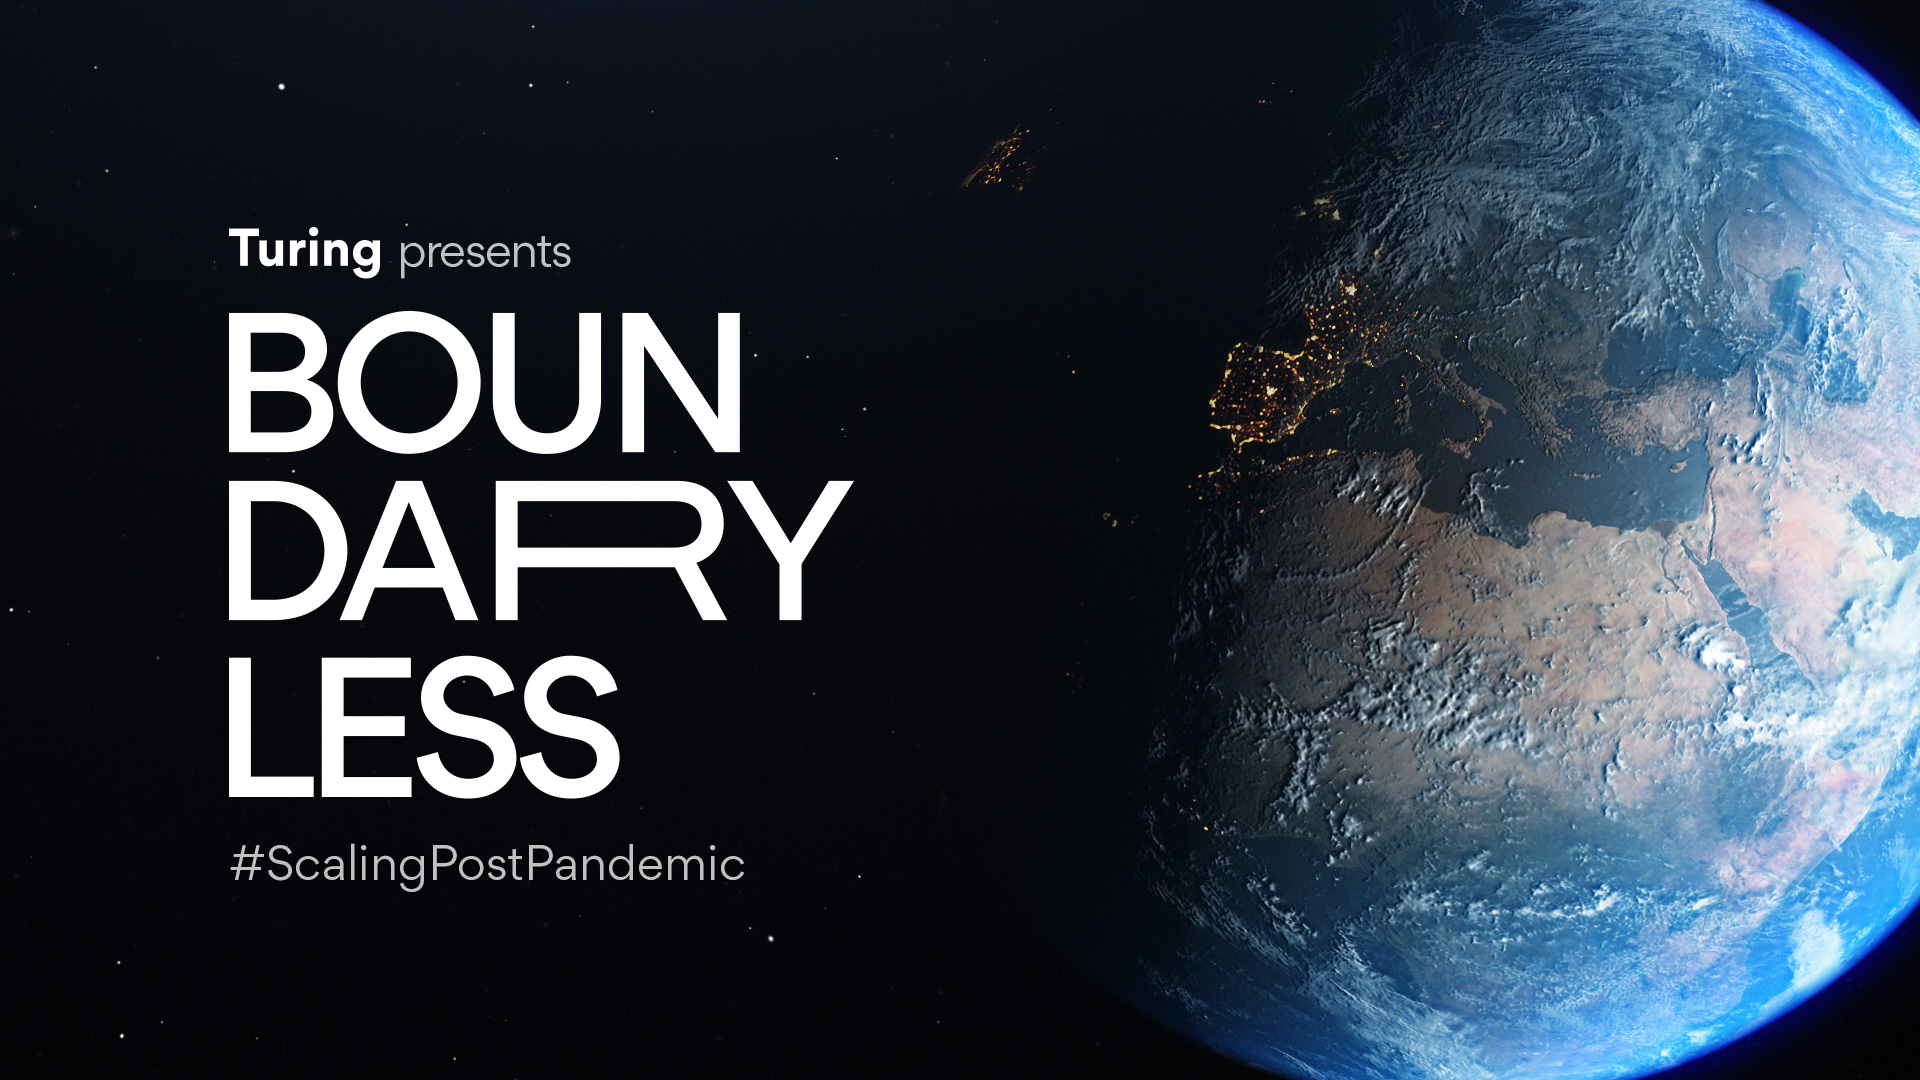 Top Takeaways from the Boundaryless: #ScalingPostPandemic Event